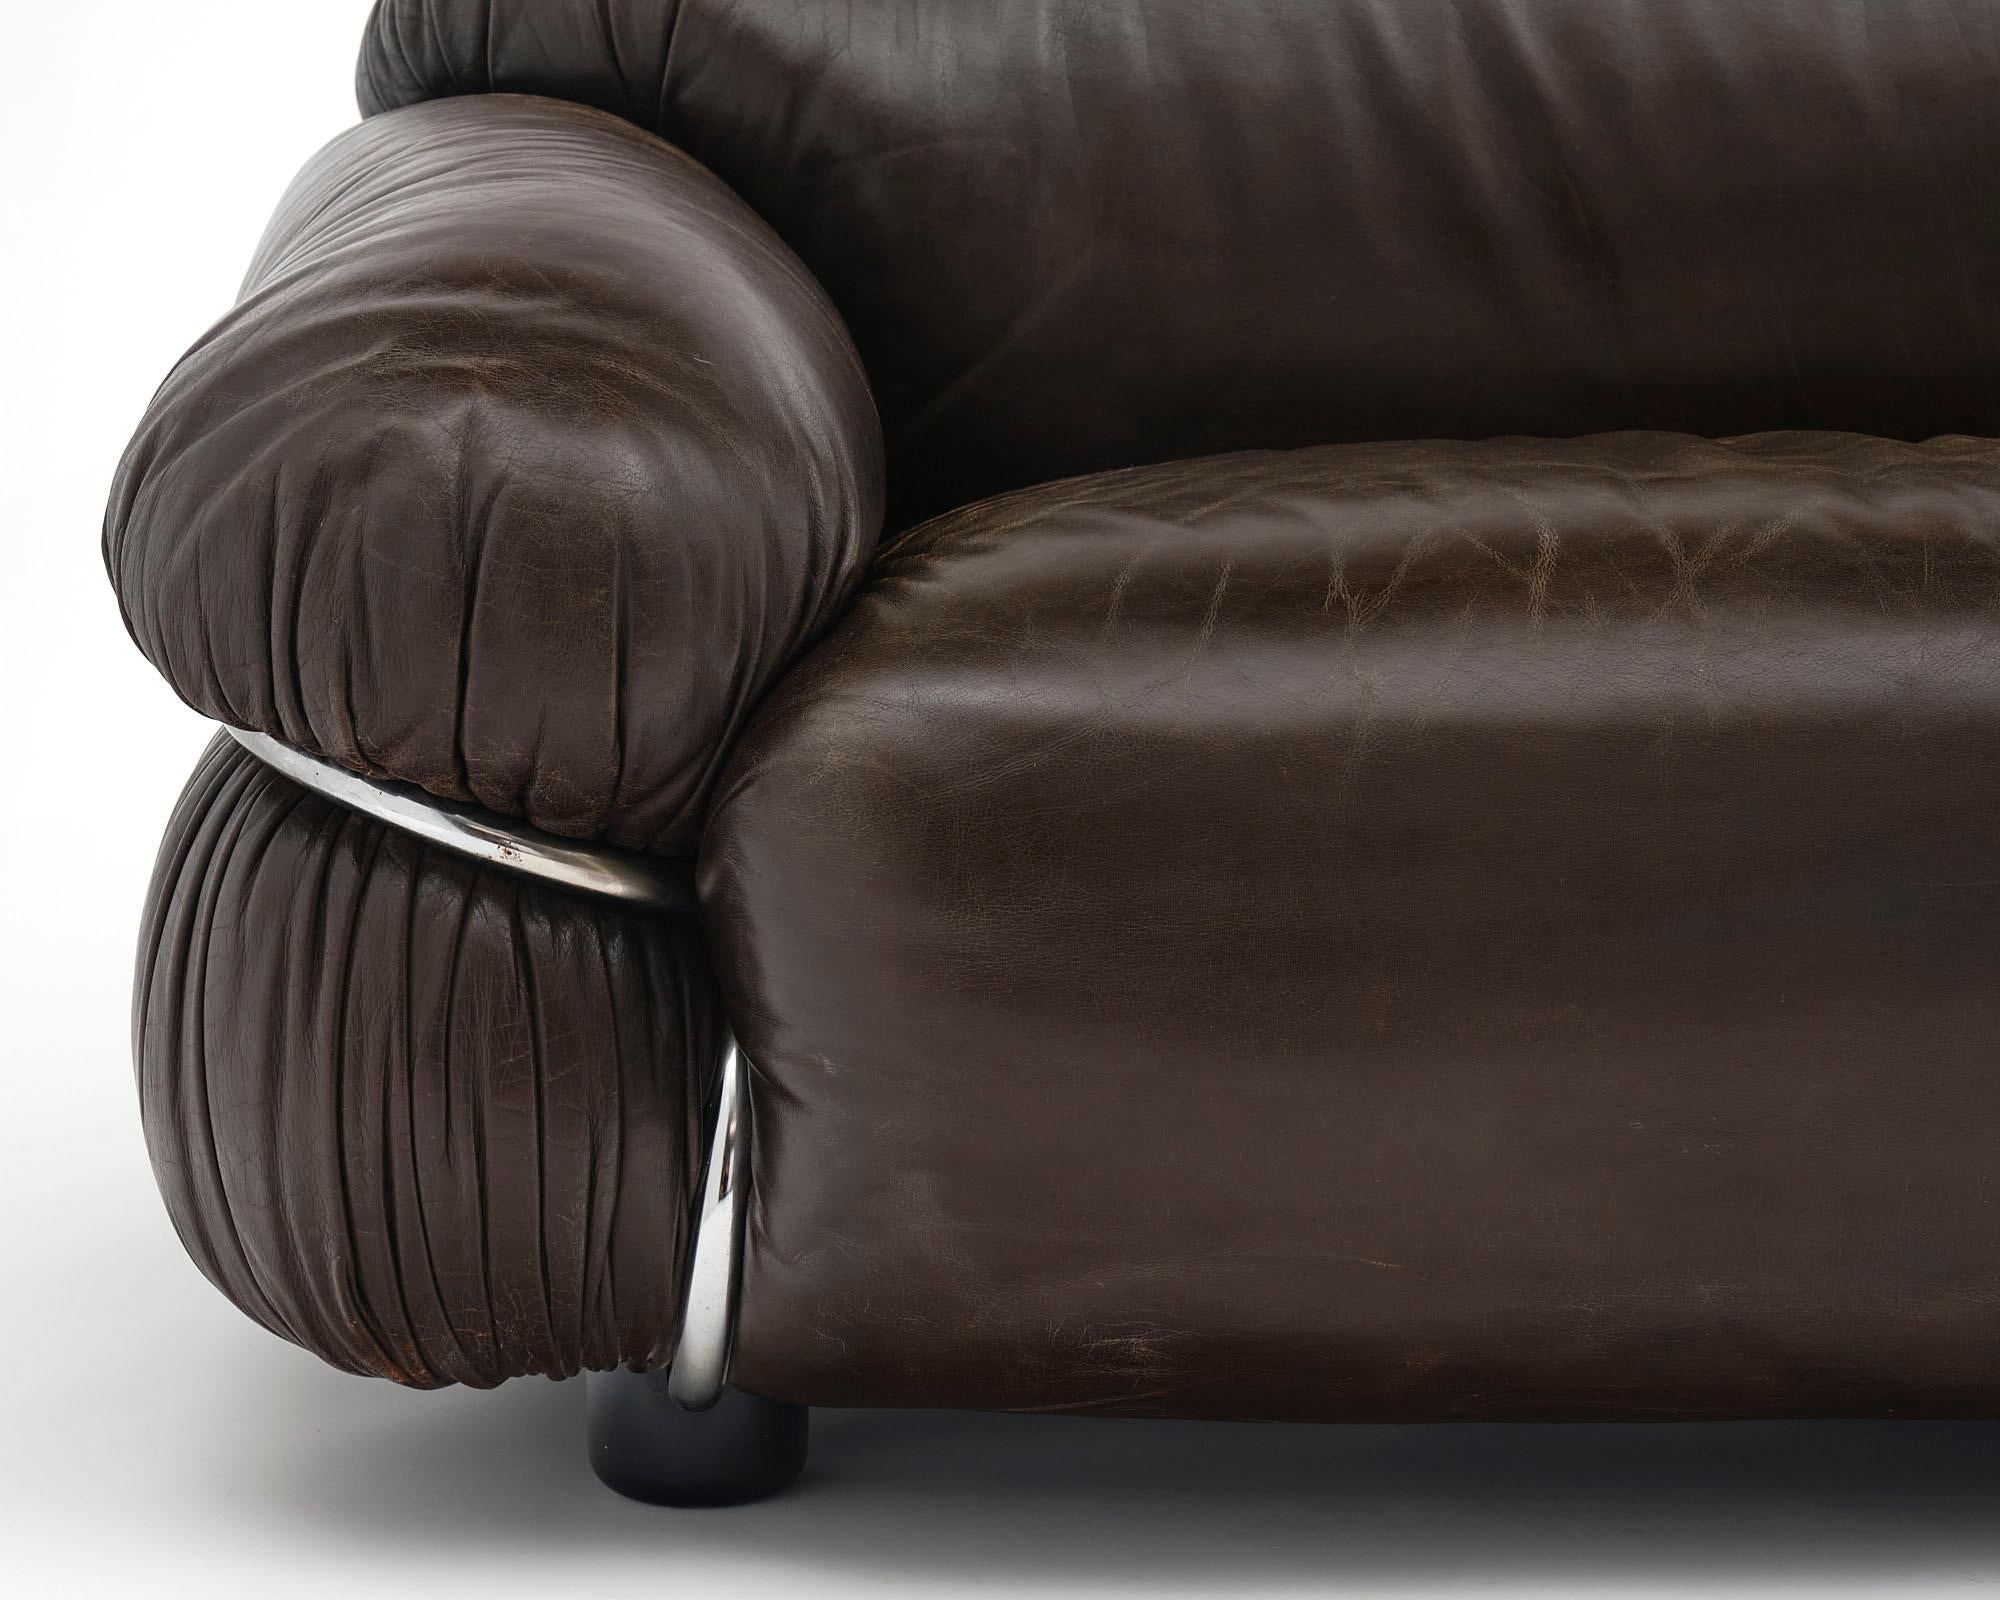 Late 20th Century Brown Leather Sesann Sofa by Gianfranco Frattini for Cassina For Sale